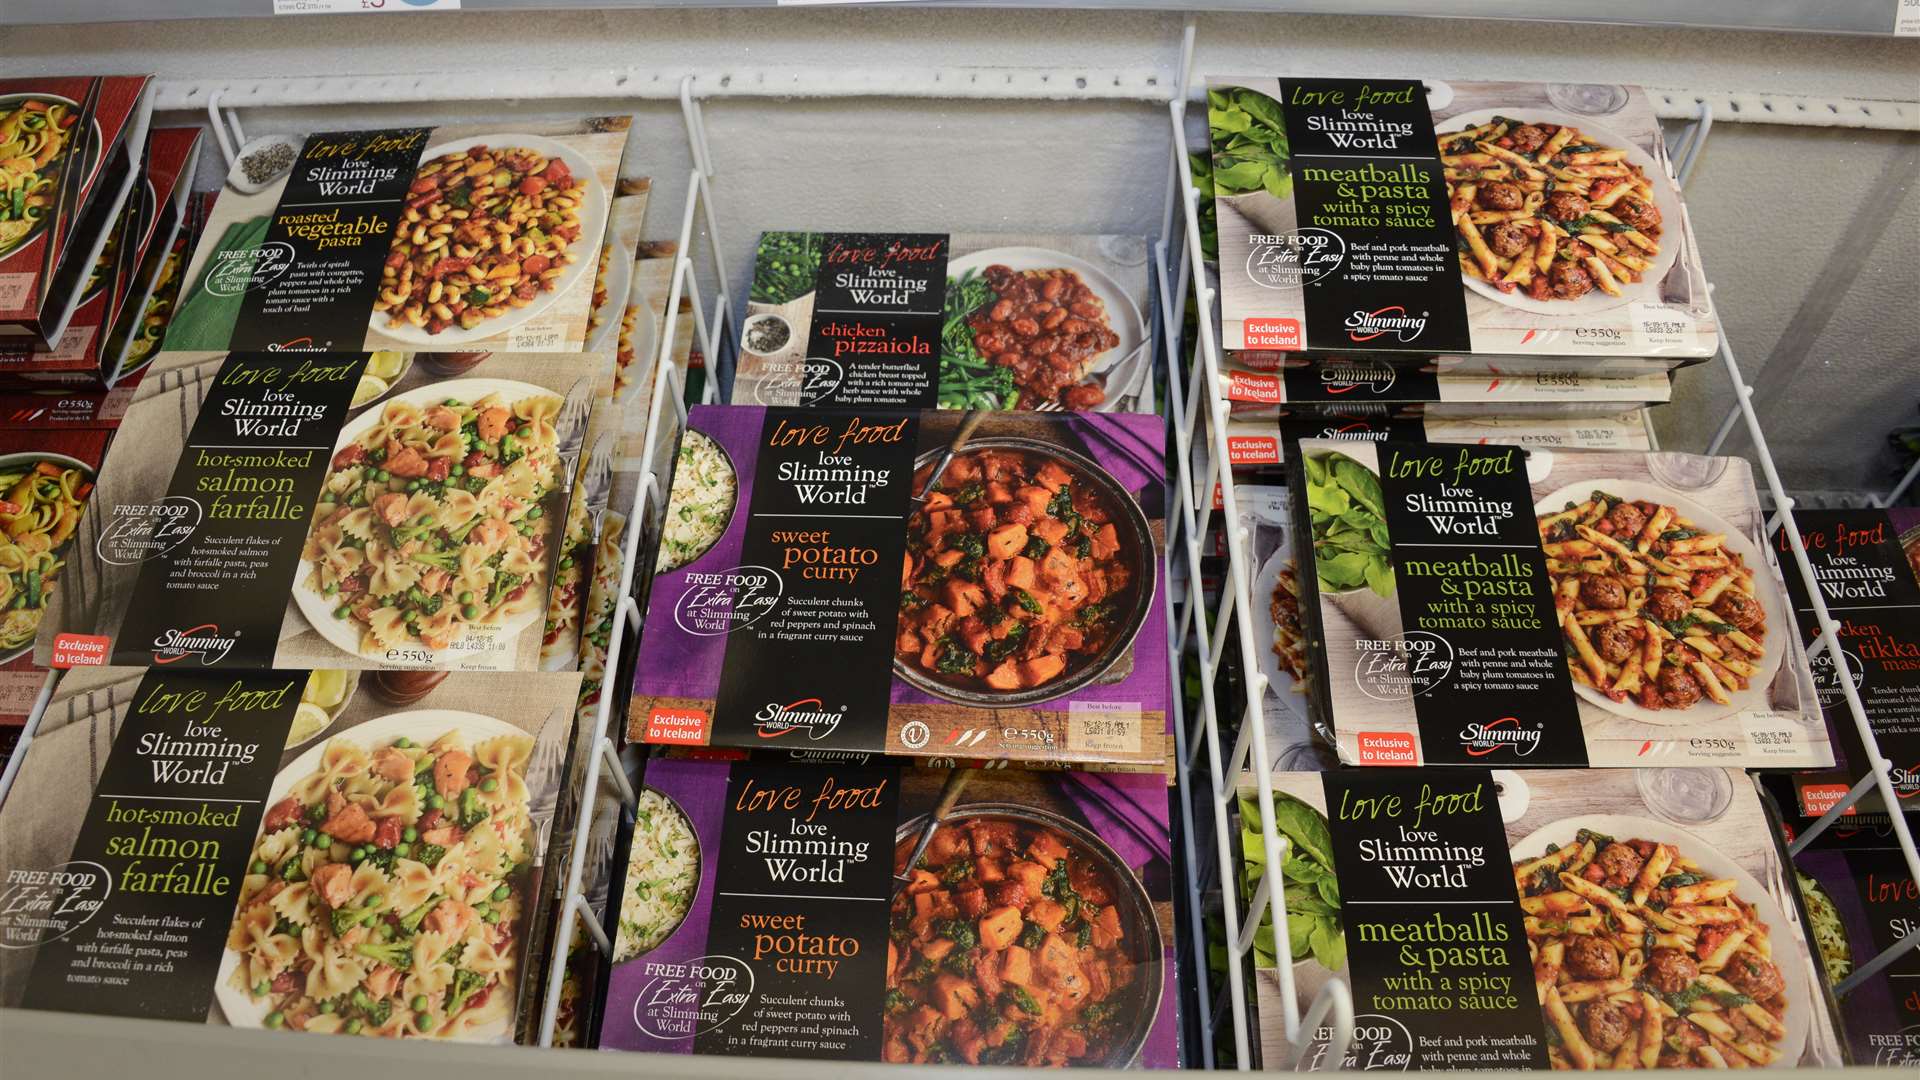 The range includes curries, noodles and pasta meals